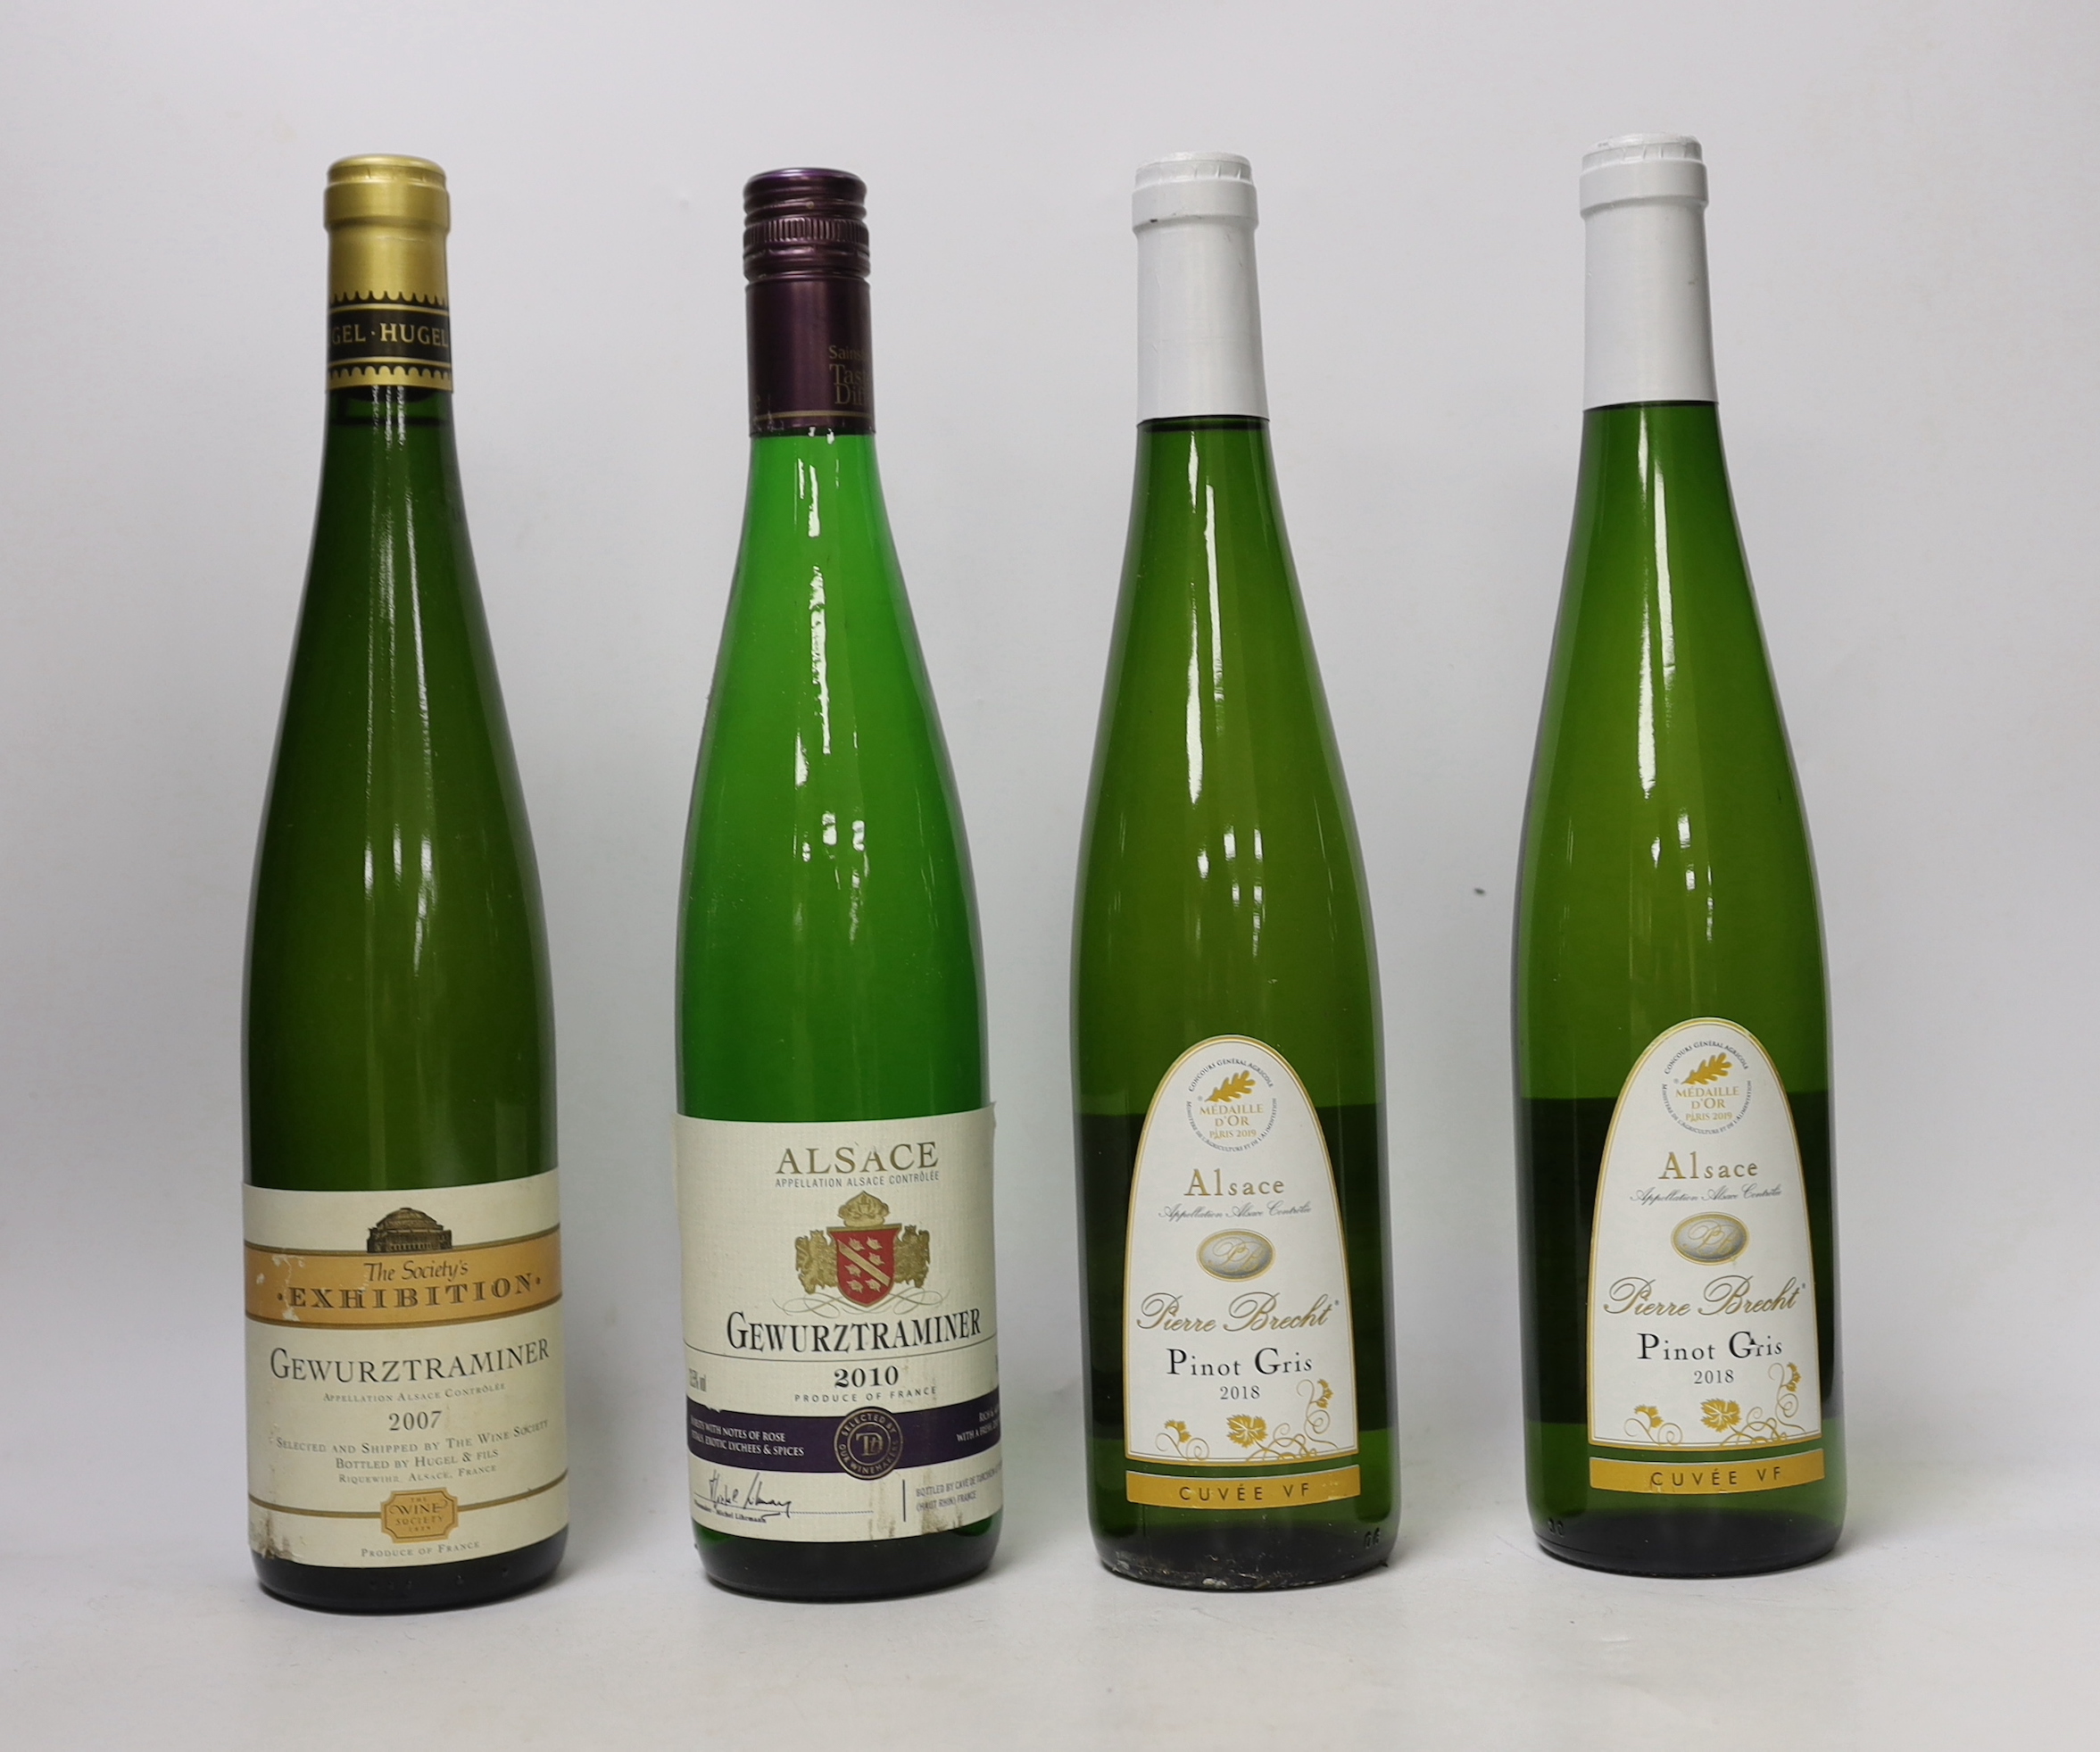 Seven bottles of white wine, Gewürztraminer and Pinot Gris